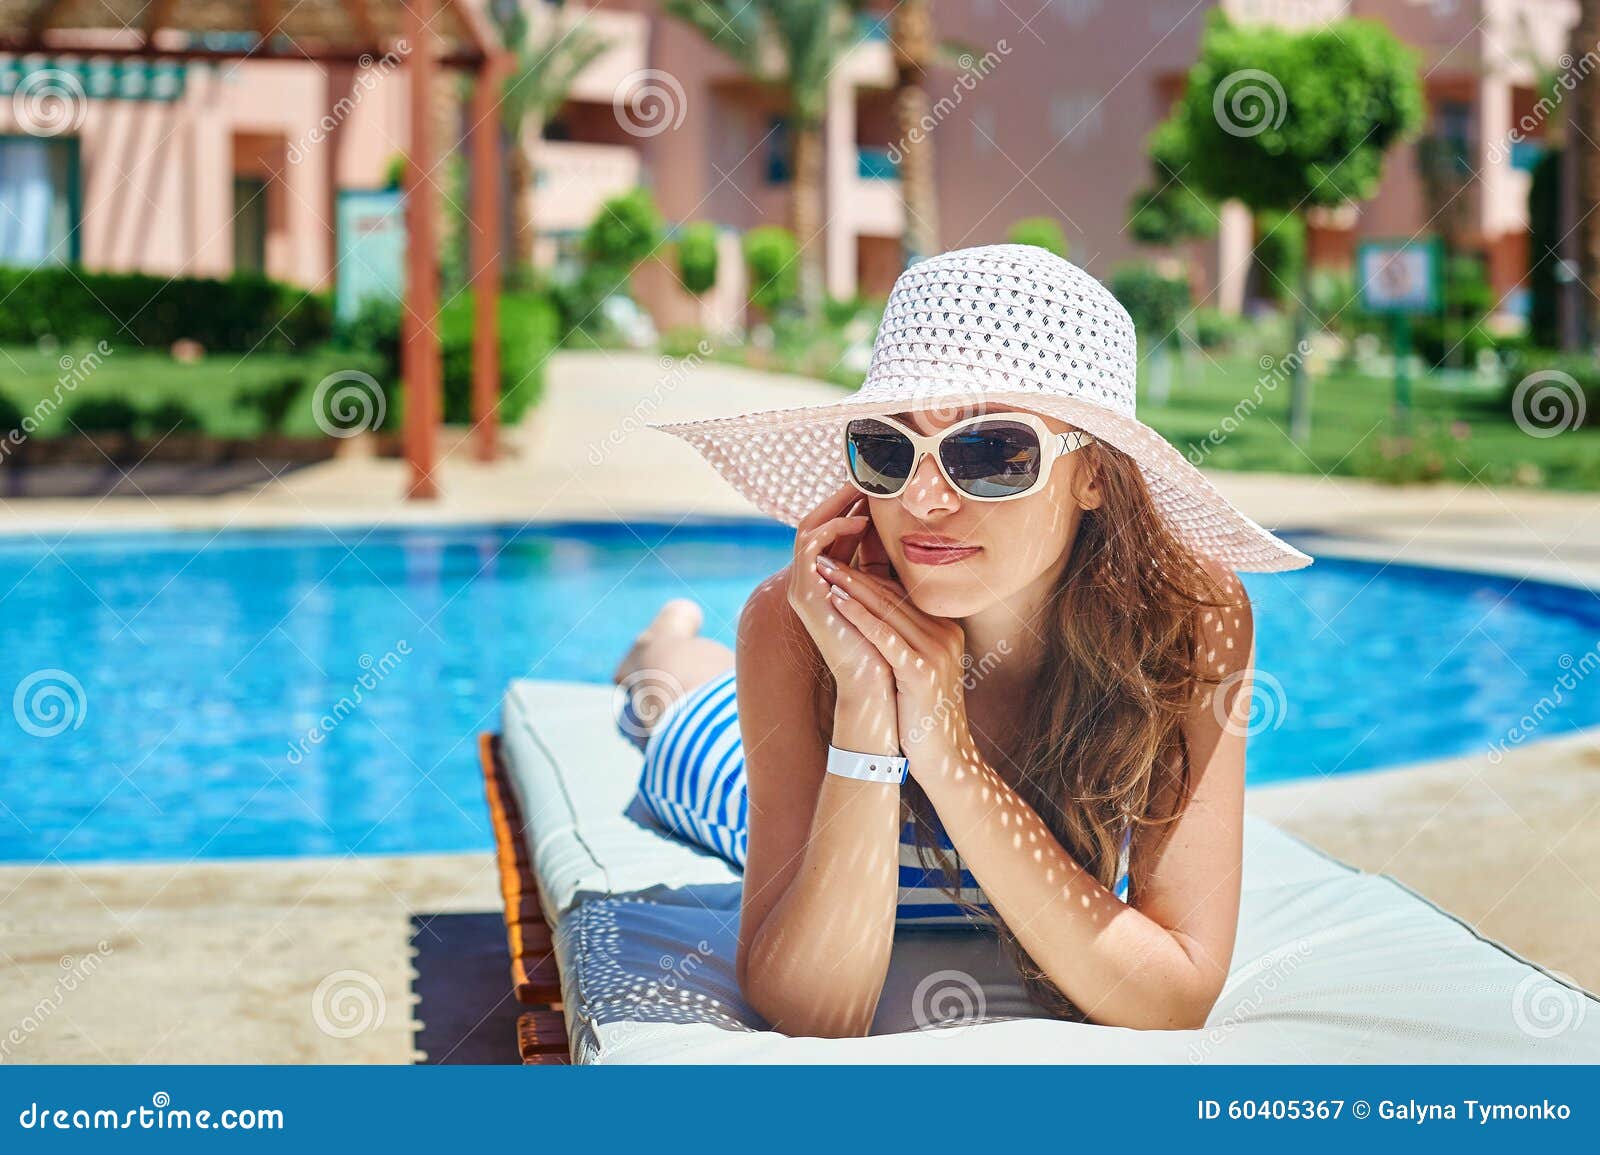 Beautiful Woman In A Big White Hat On A Lounger By The Pool Stock Image